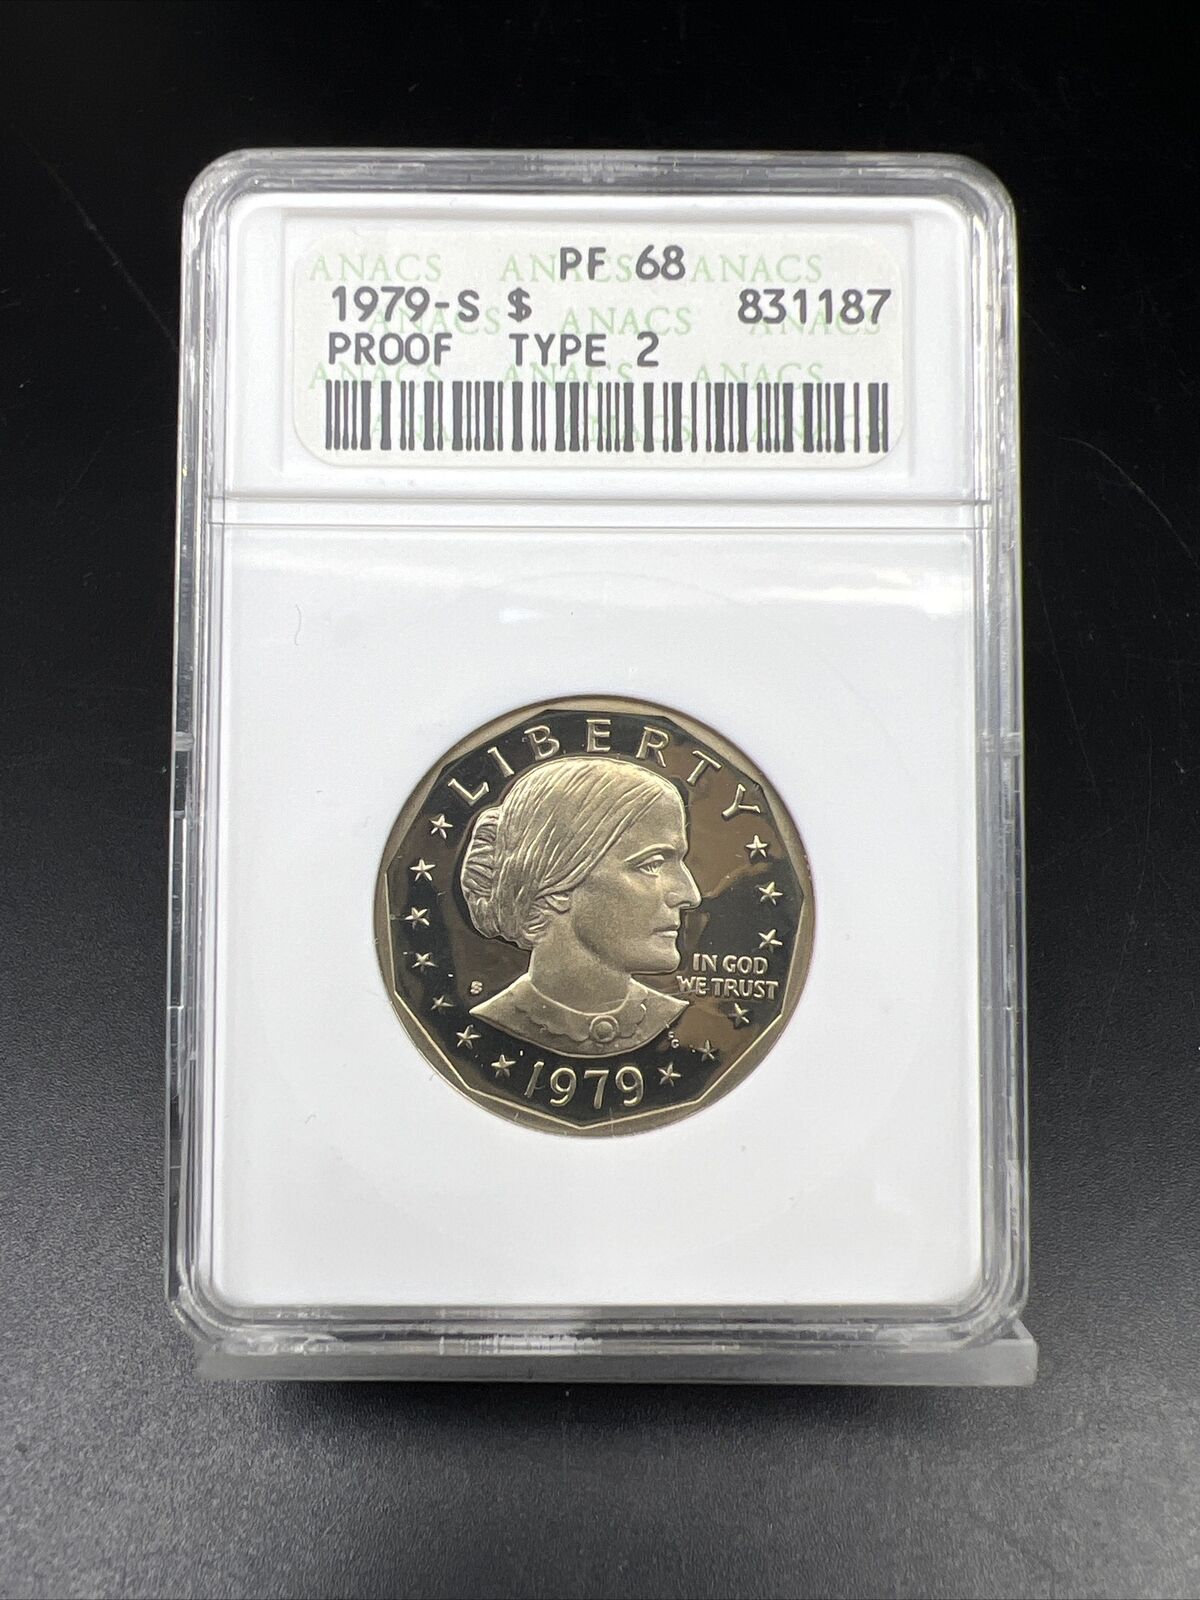 1979 S SBA $1 Susan B Anthony Small Type 2 Coin ANACS Certified PF68 Proof